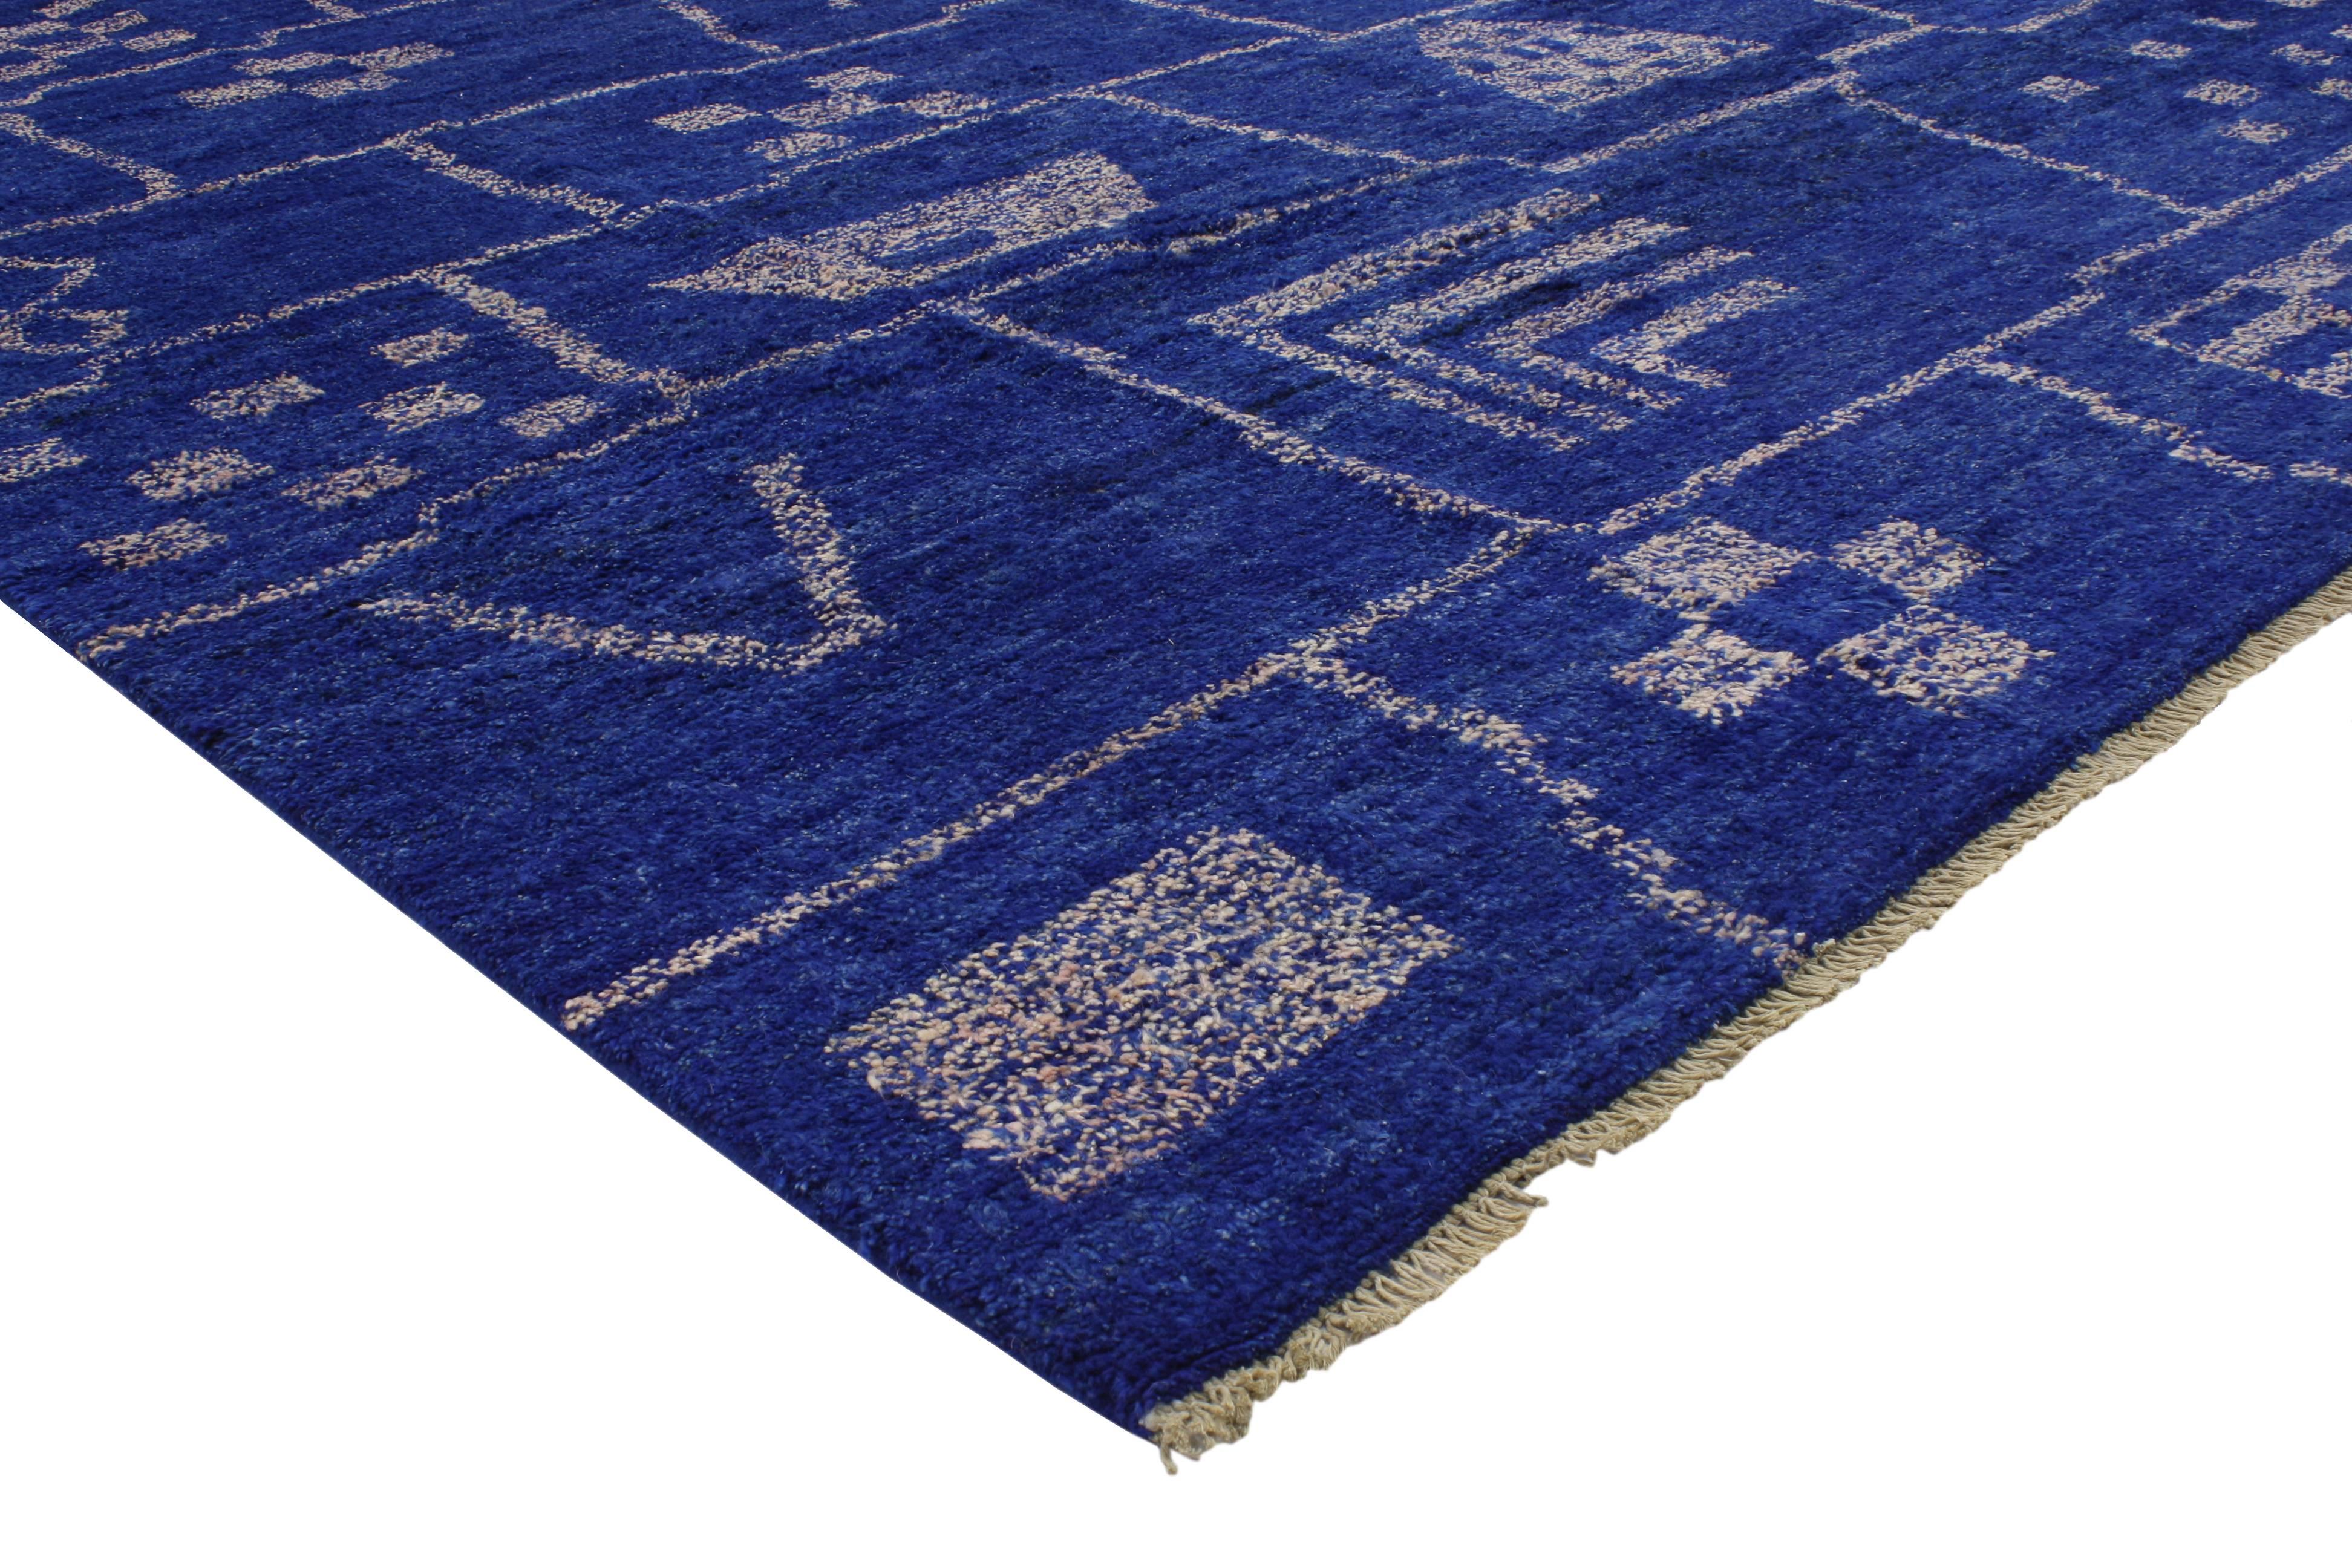 Saturated in an extraordinary palette of cobalt blue, this Moroccan style rug showcases true simplistic style with a punch of color. The geometric motifs and linear lines in this awe-inspiring composition create something a little more modern and